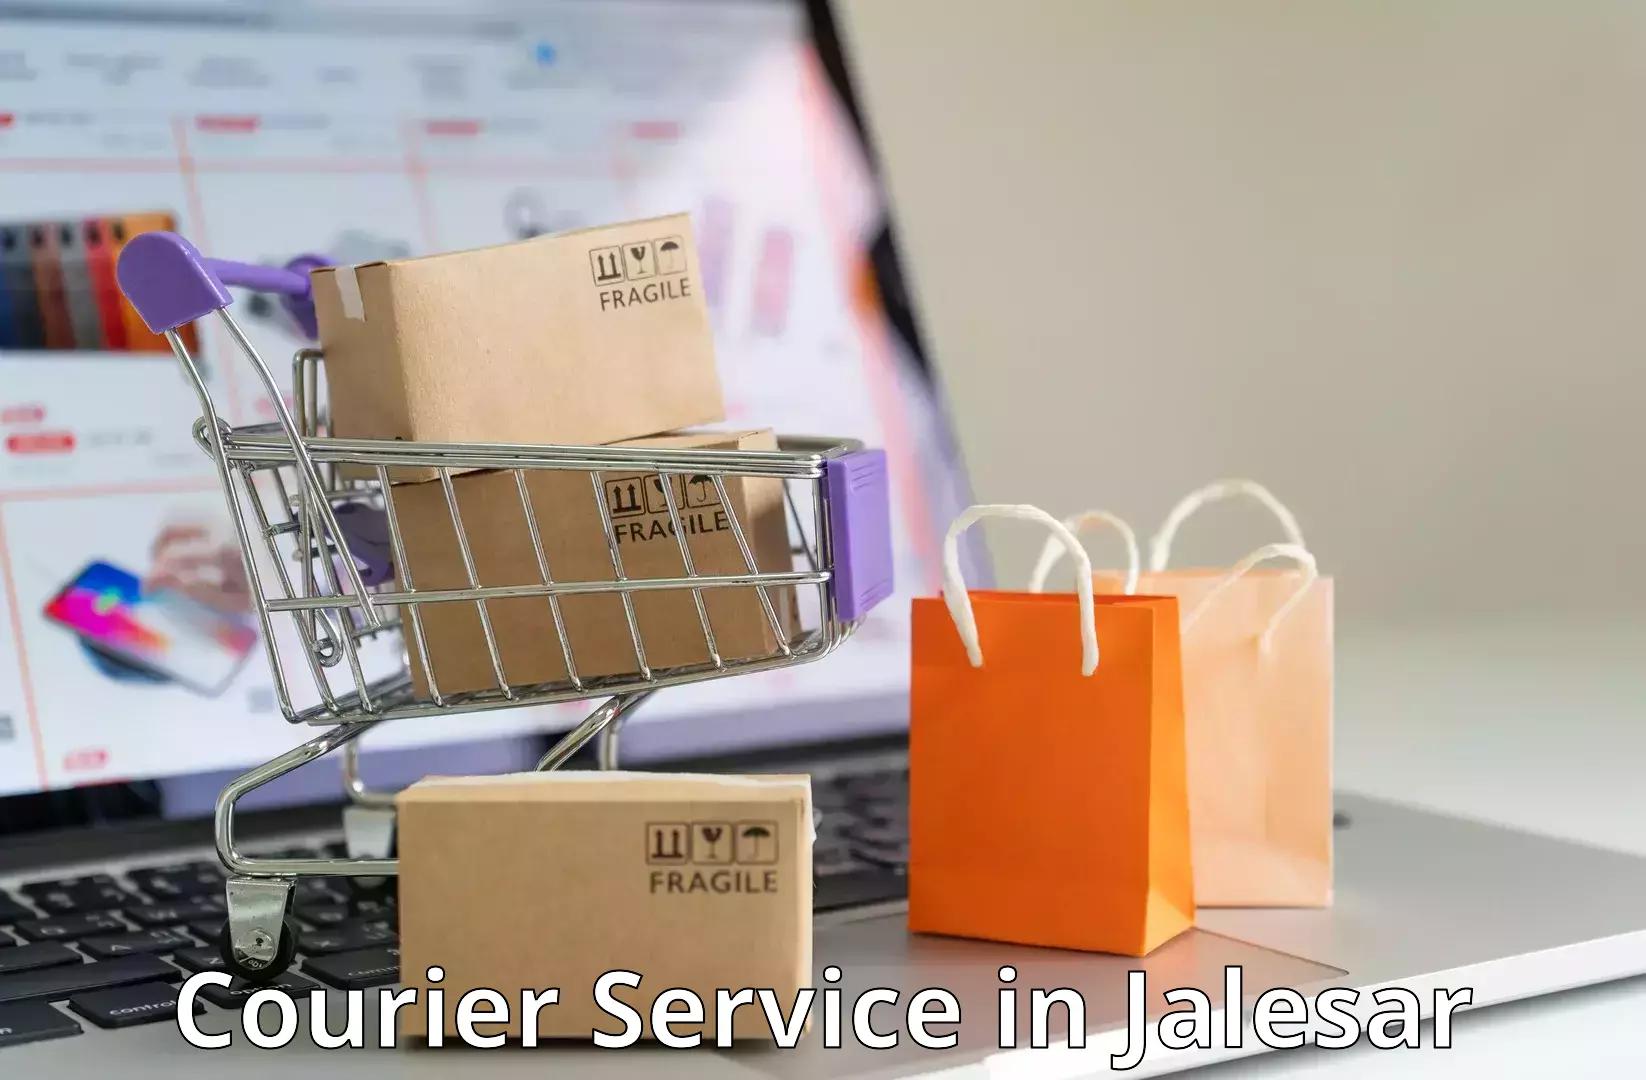 Nationwide shipping capabilities in Jalesar